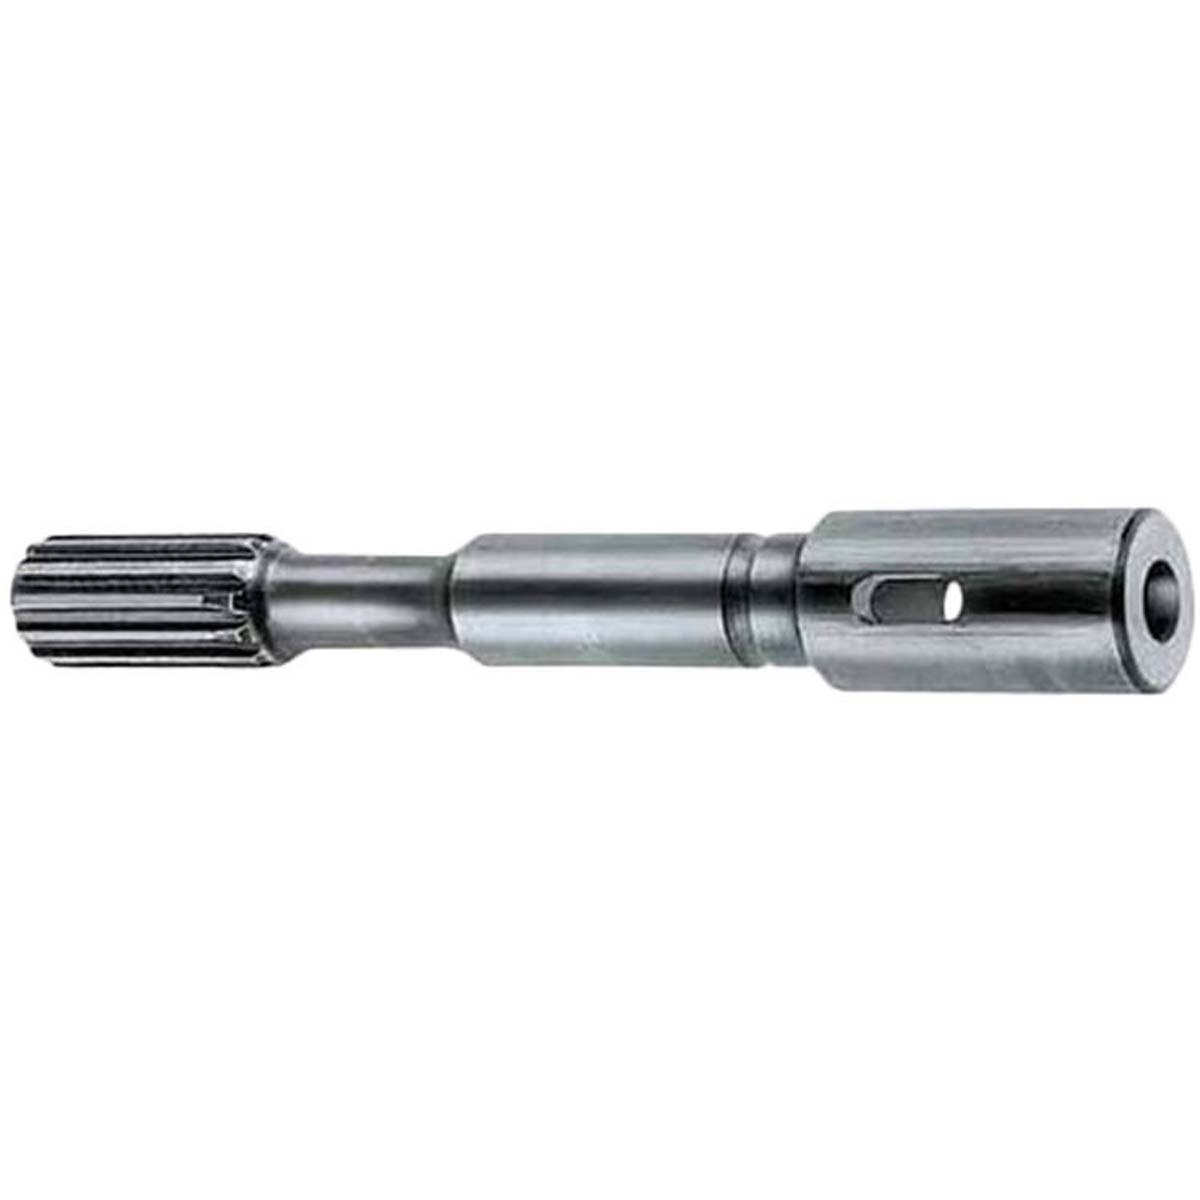 The Milwaukee B taper bit adapter lets you use B taper bits in your spline drive rotary hammer for greater productivity. Get more out of your spline drive rotary hammer, including models 5318-21, 5319-21, 5321-21, 5321-22 and 5345-21, with this heavy-duty, all-metal a taper bit adapter. Includes a drift pin (48-86-0120).